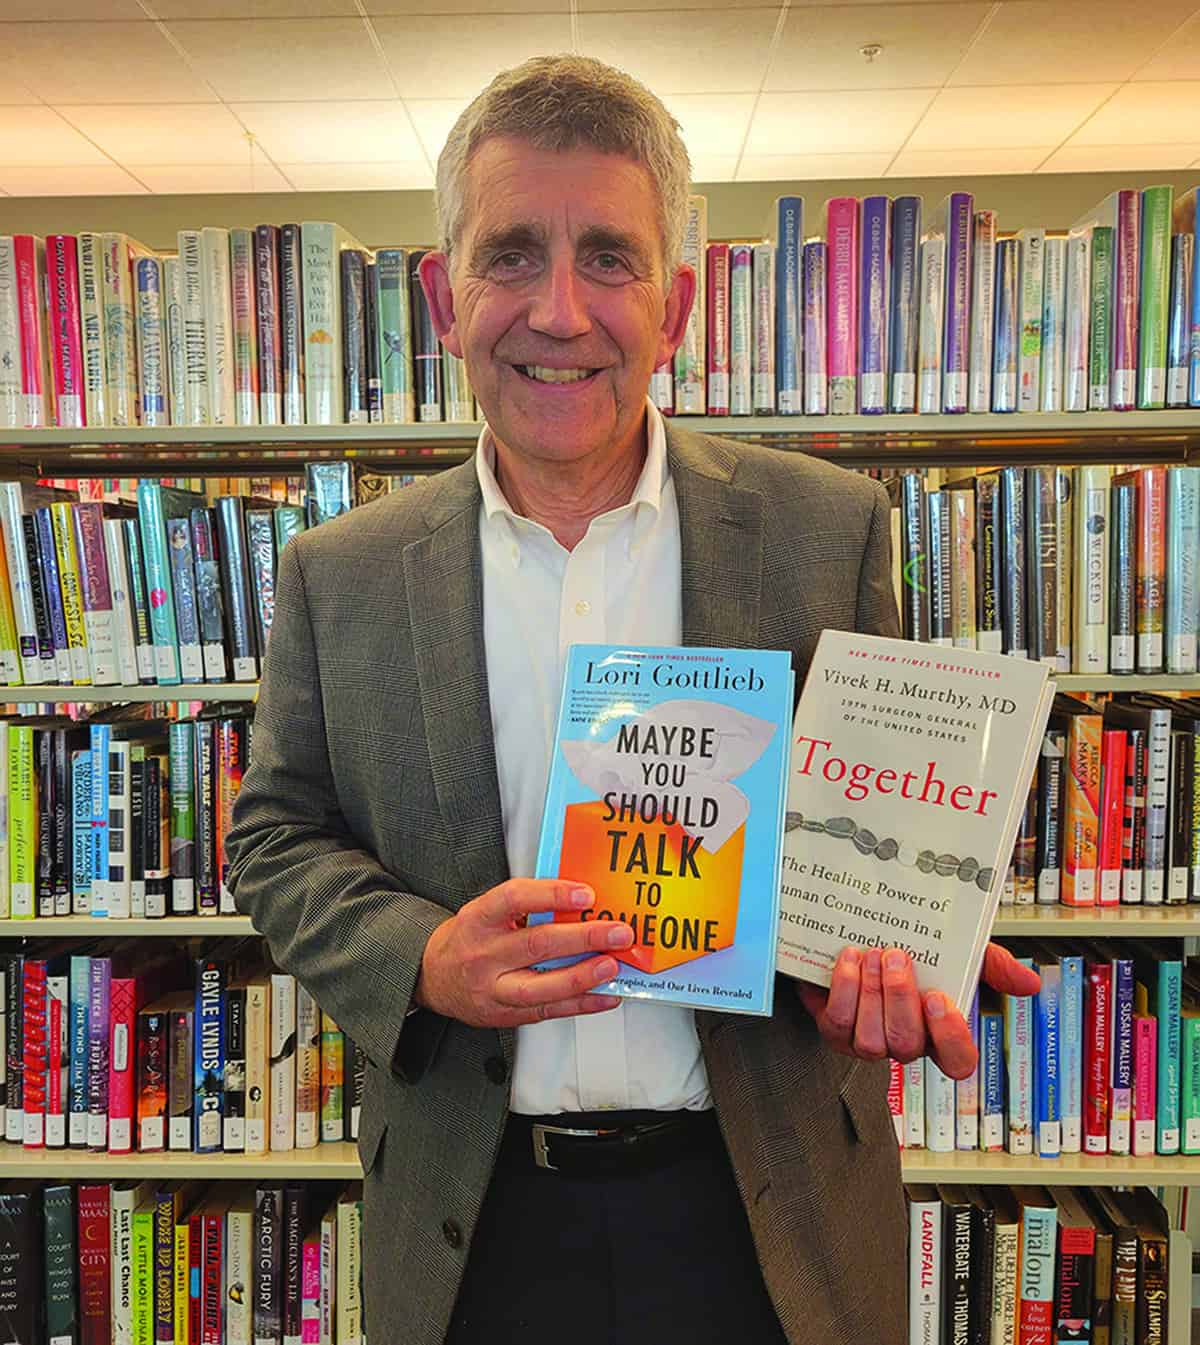 Princeton Public Library to launch book discussions for mayor’s mental health and wellness campaign next month